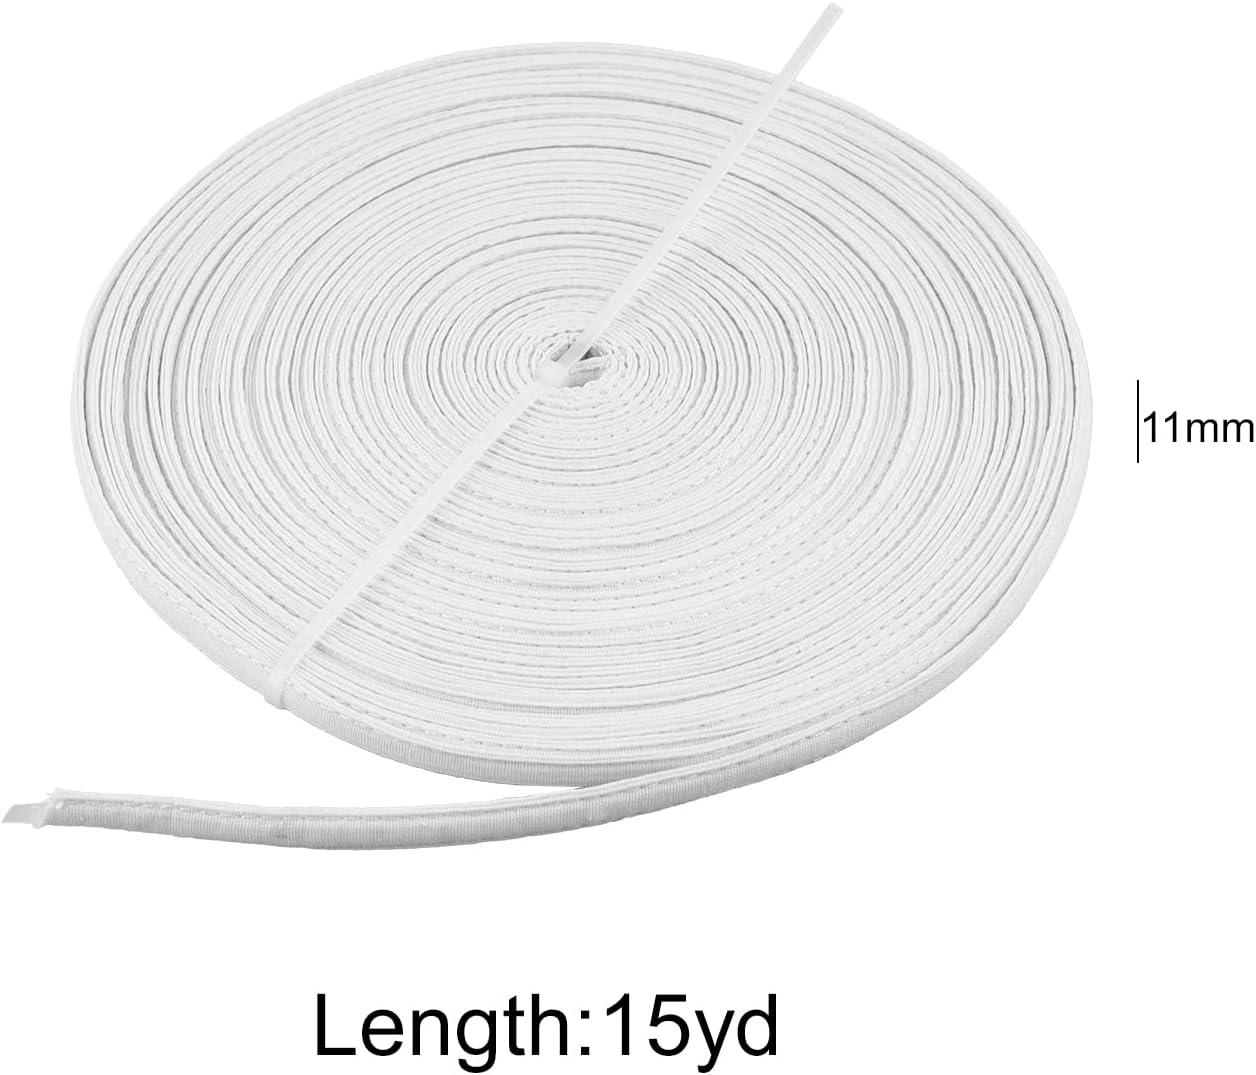 10mm Polyester Boning for Sewing - Sew-Through Low Density Boning for  Corsets, Nursing Caps, Bridal Gowns,50 Yards(White)